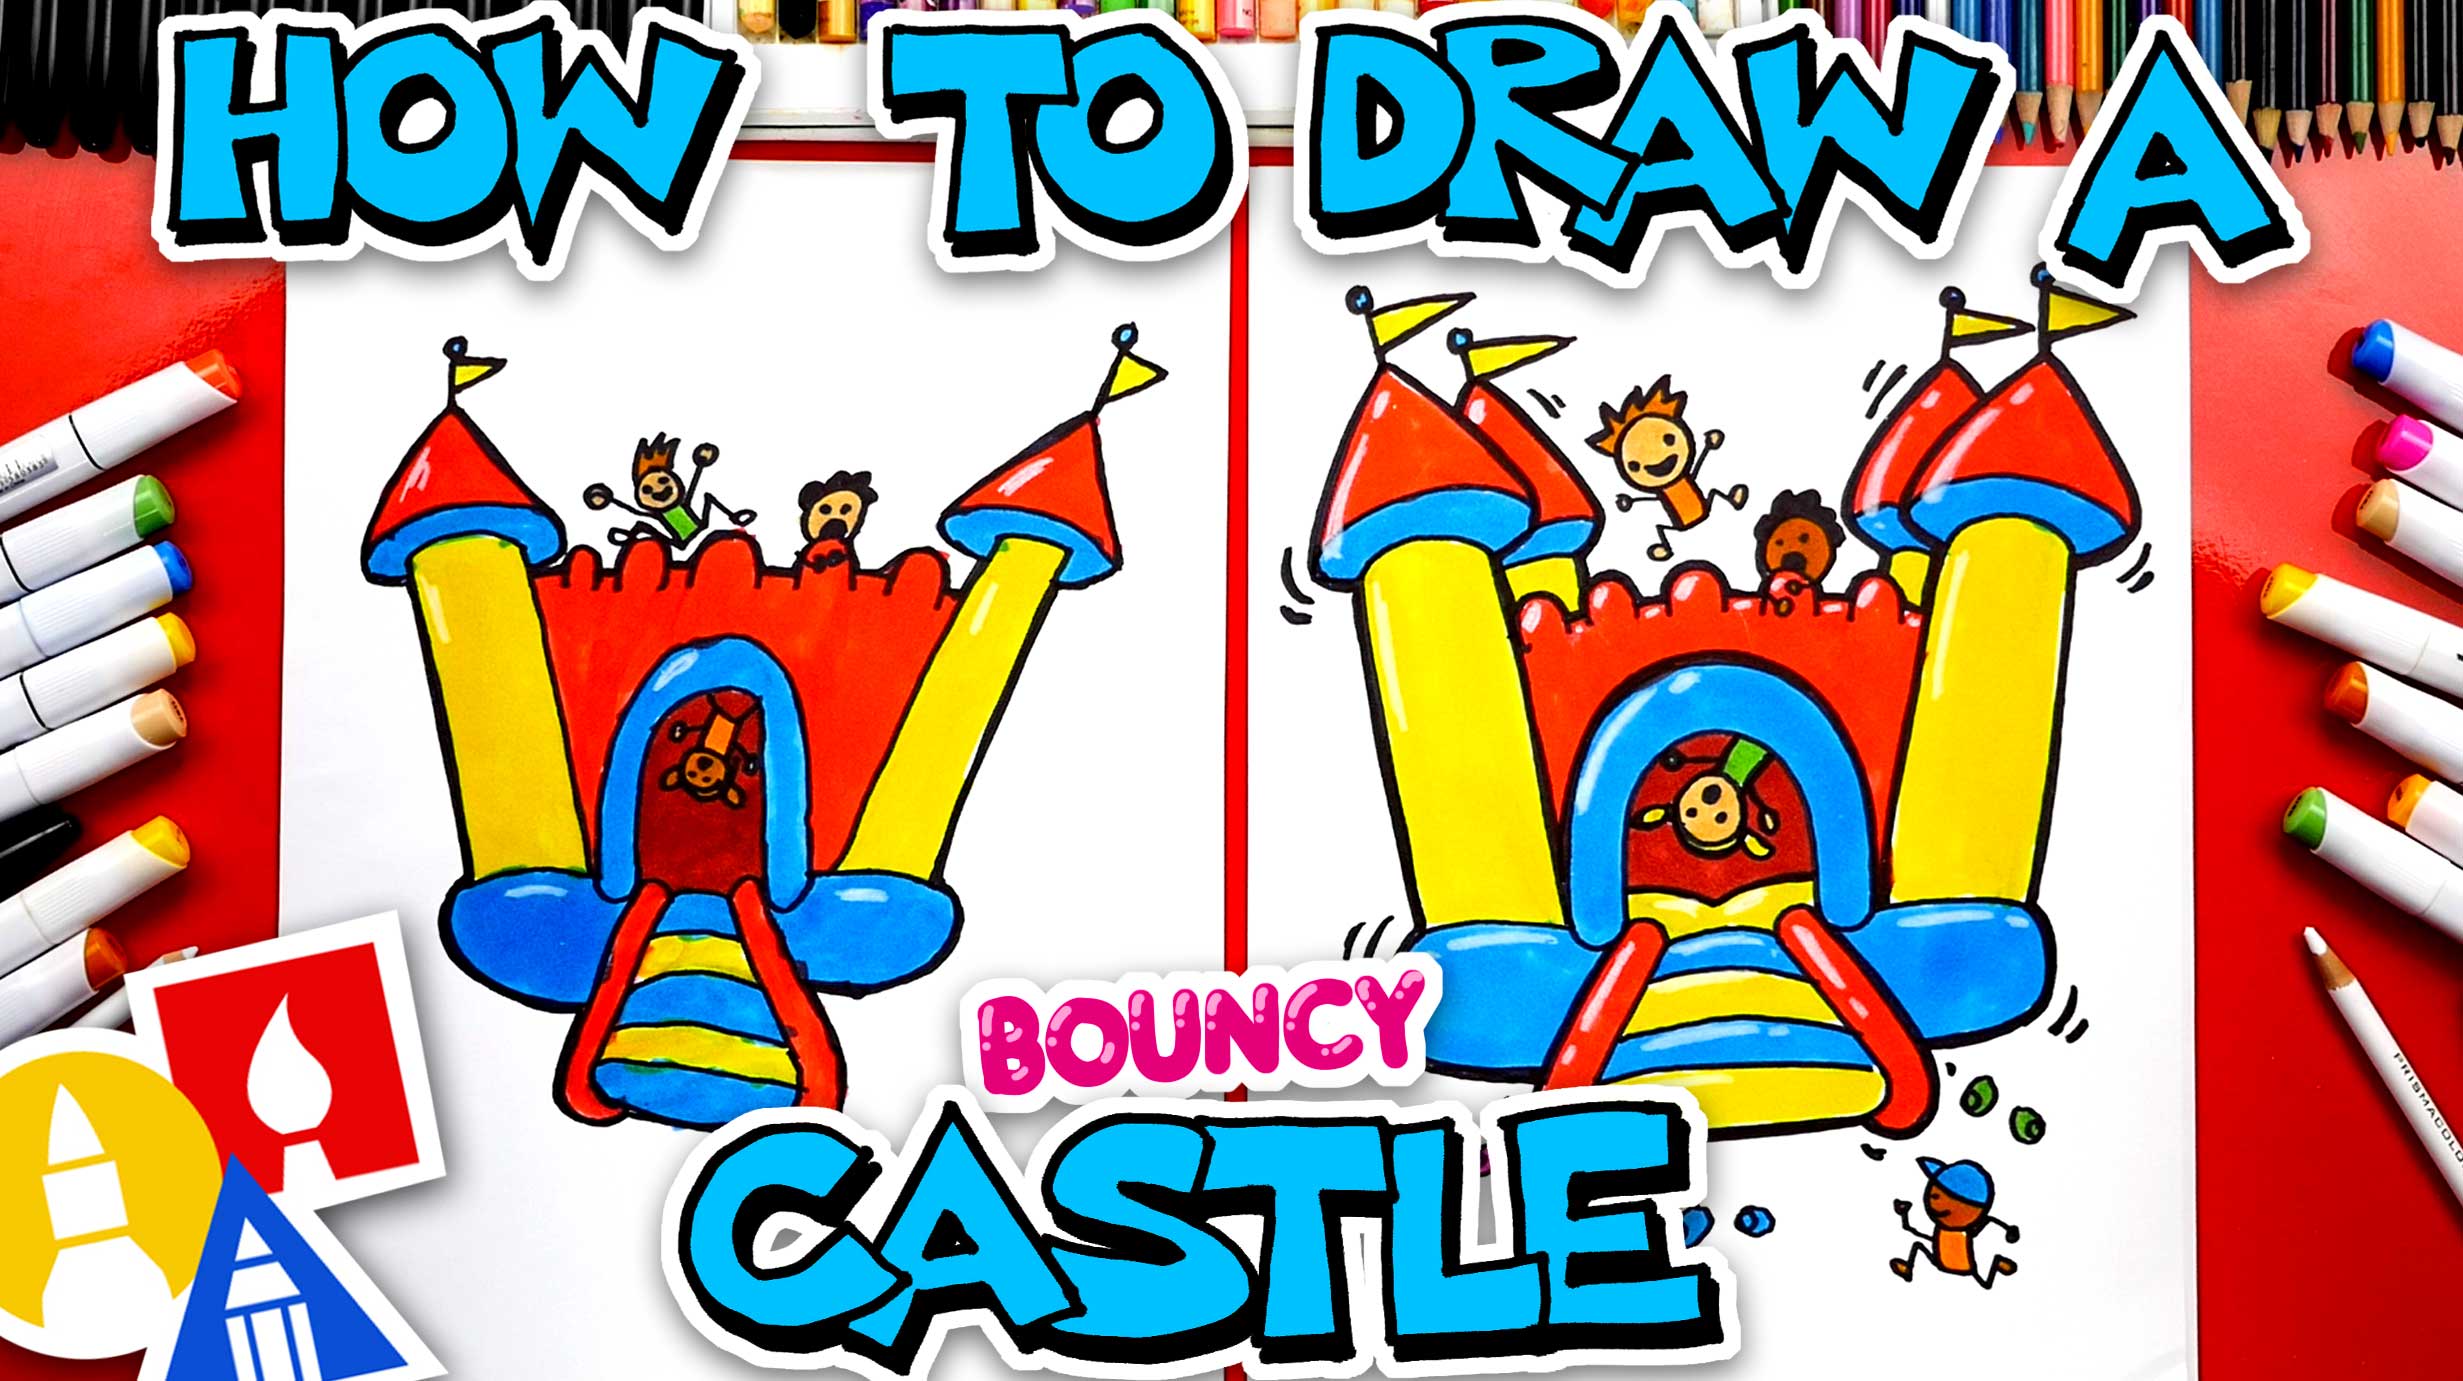 How To Draw A Bouncy Castle Art For Kids Hub